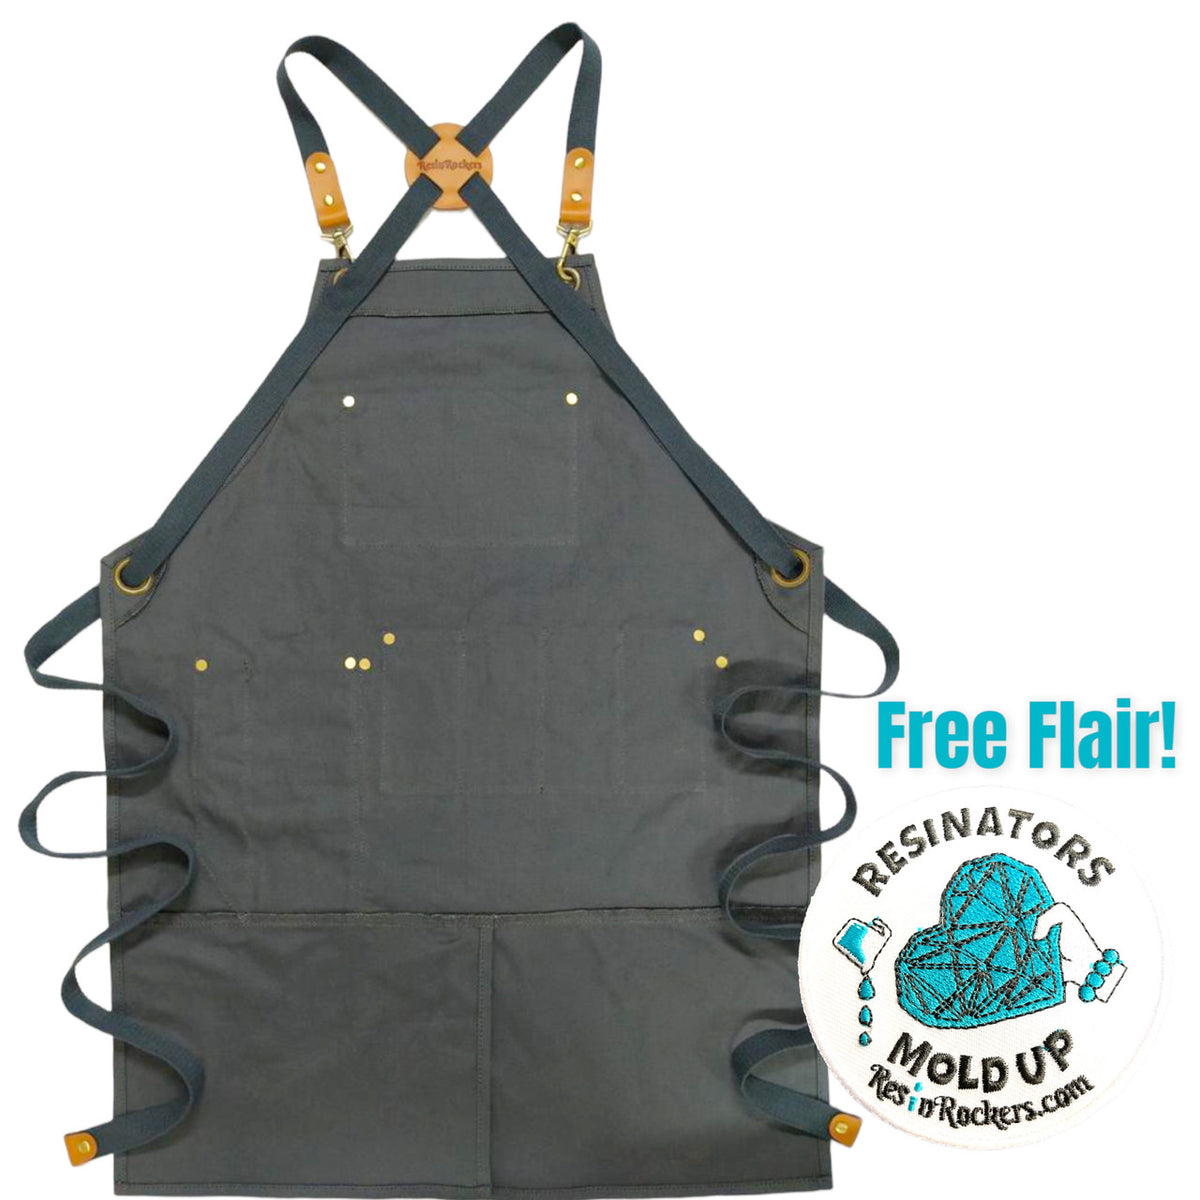 Exclusive Resin Rockers Heavy Duty Canvas Apron with Pockets and FLAIR Designed for Epoxy and UV Resin Art